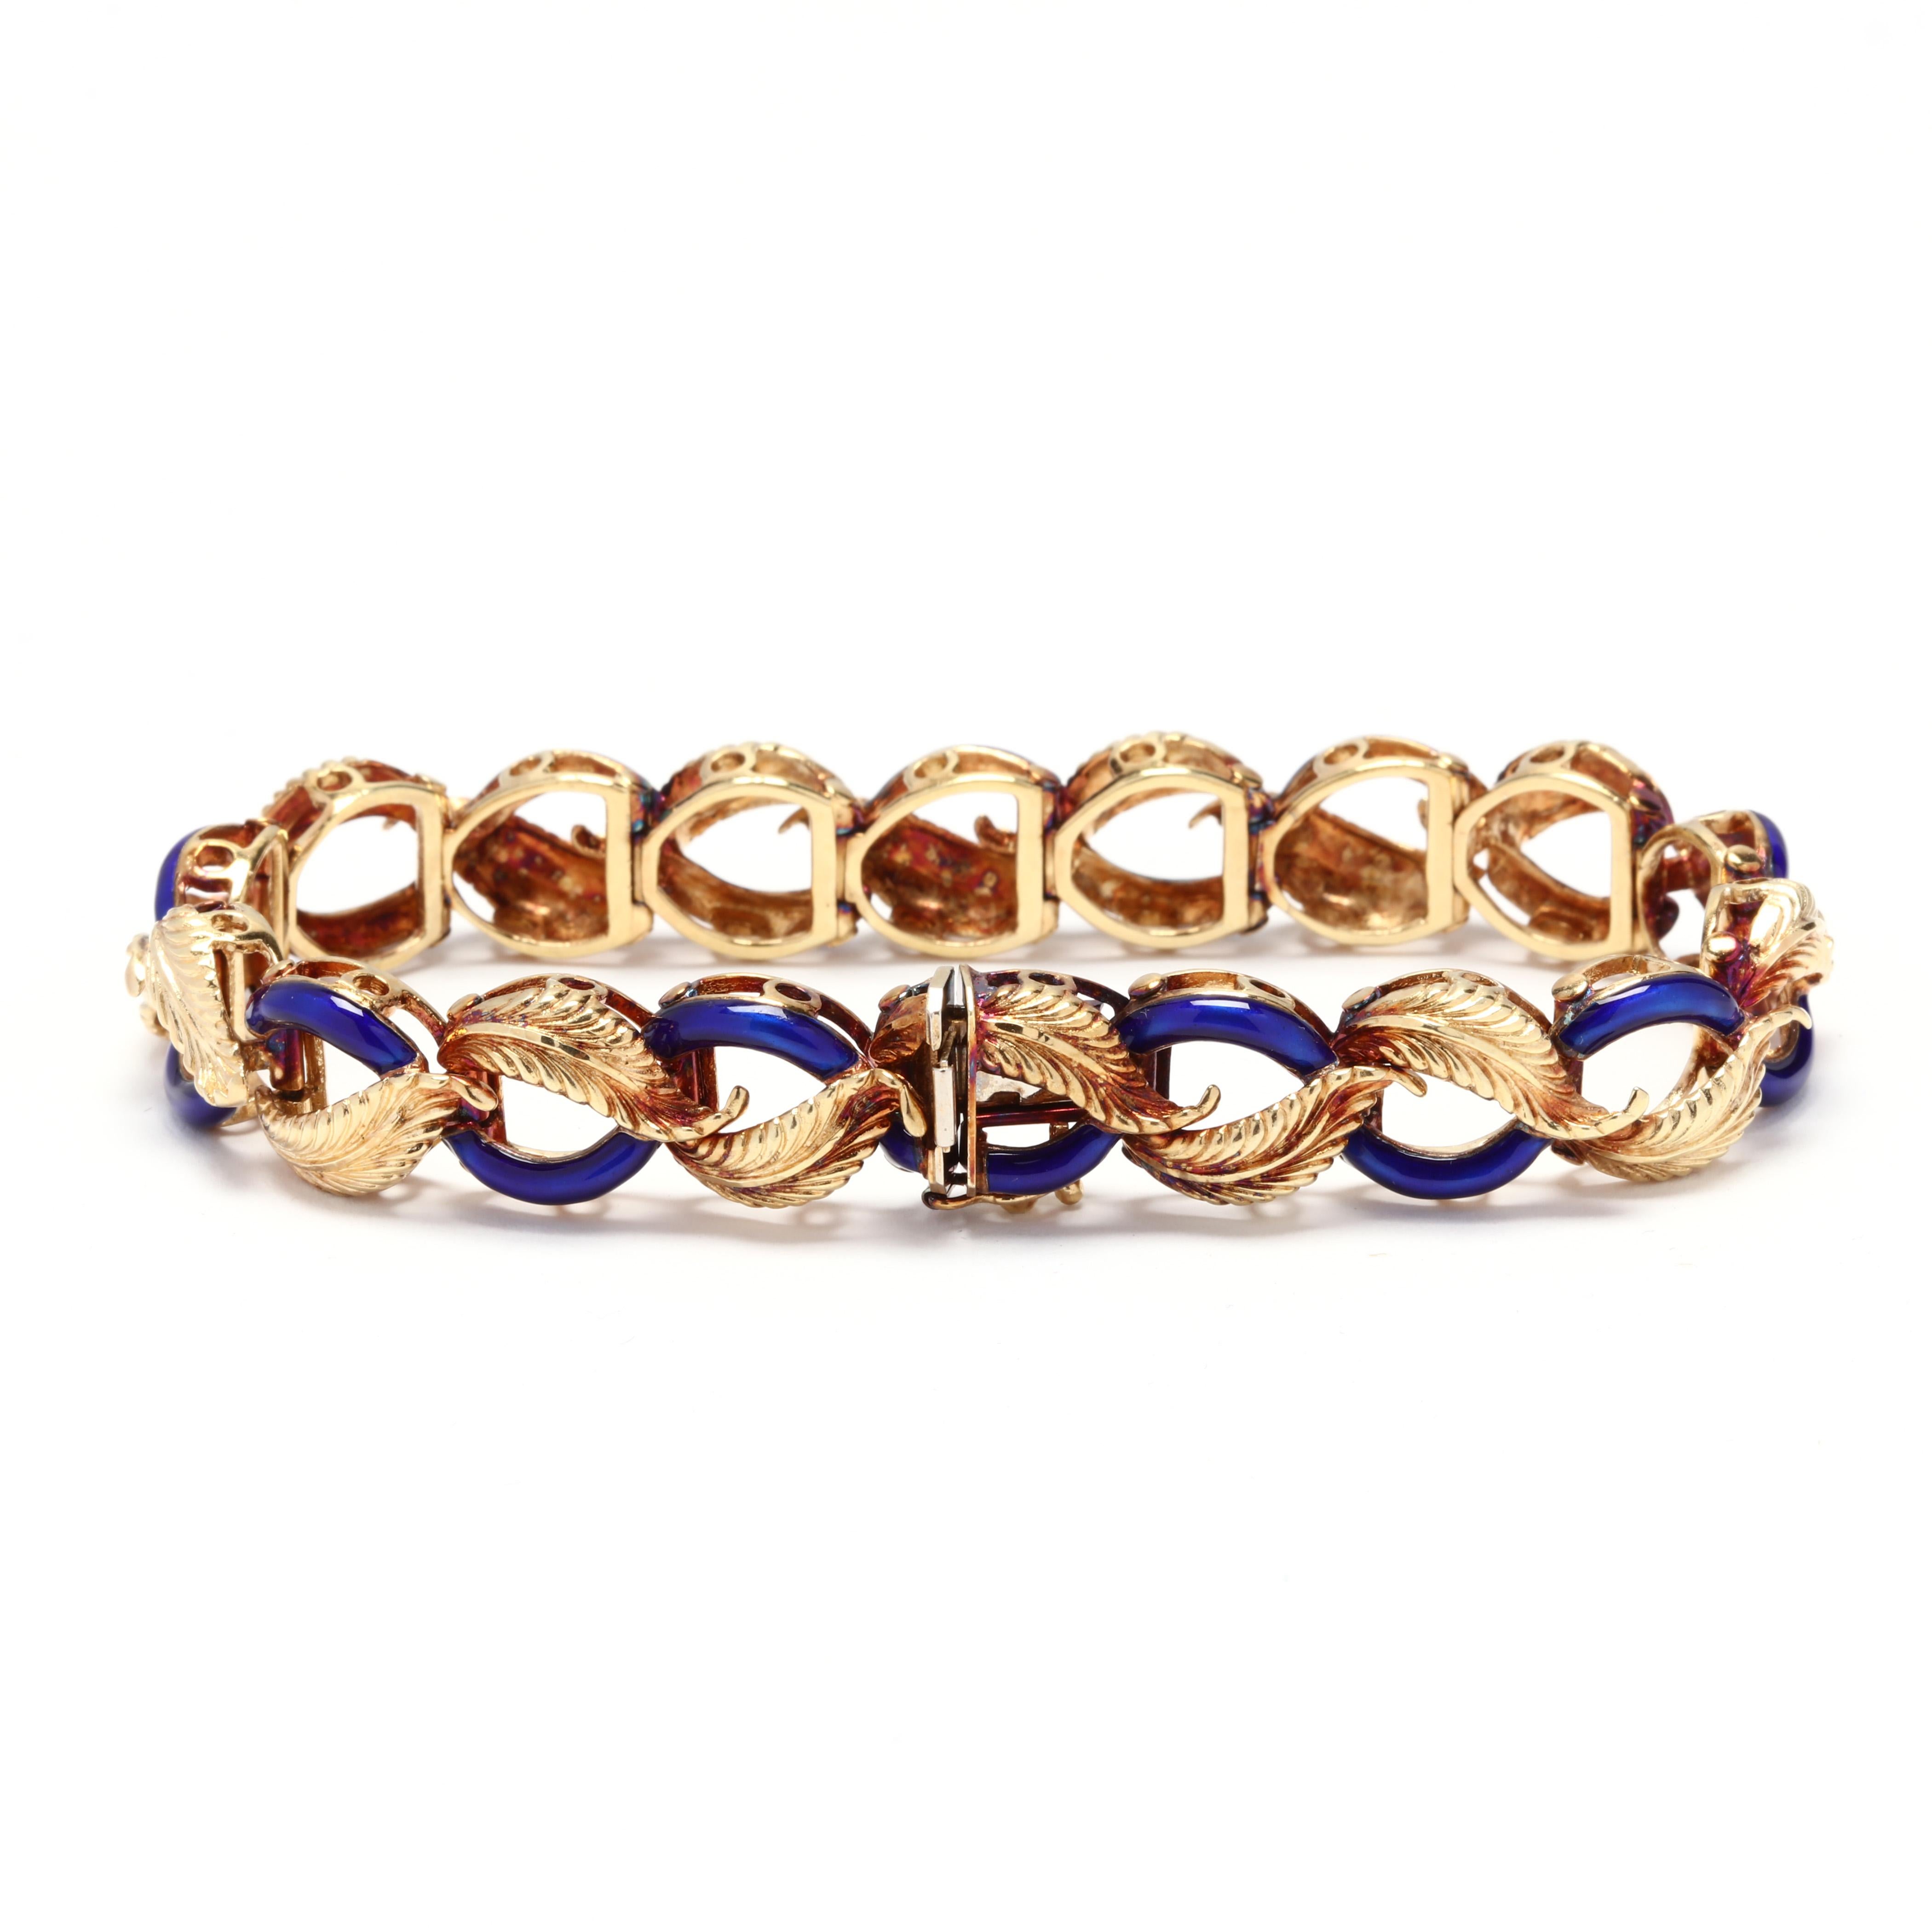 A vintage 14 karat yellow gold and blue enamel leaf bracelet. This bracelet features curved leaf motifs in a rounded zig zag pattern with alternating cobalt blue enamel links with a box clasp.

Length: 7.5 in.

Width: 1/2 in.

21.72 dwts.

* Please